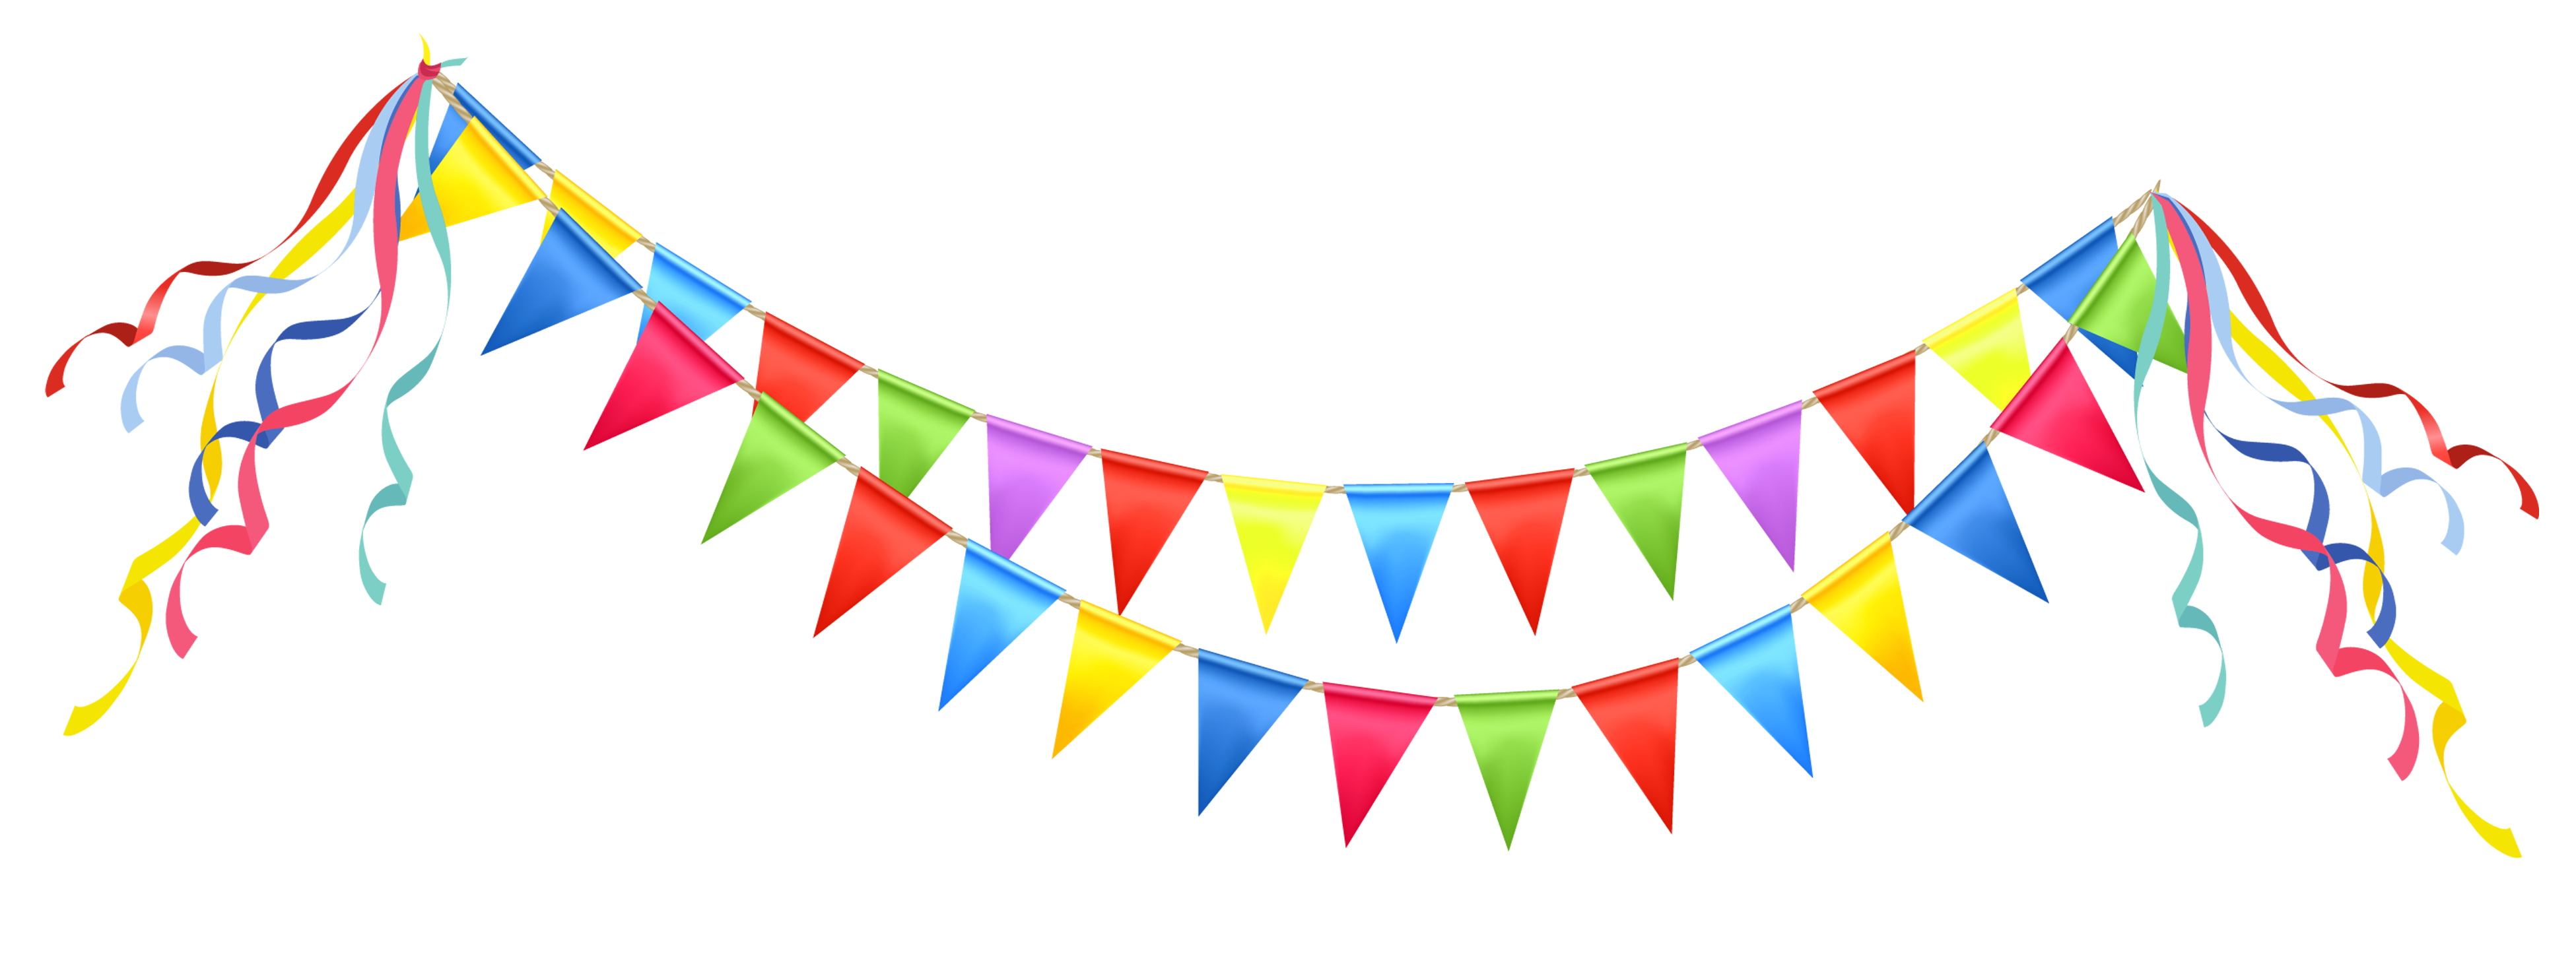 Free party pictures clipartix. Fiesta clipart banner